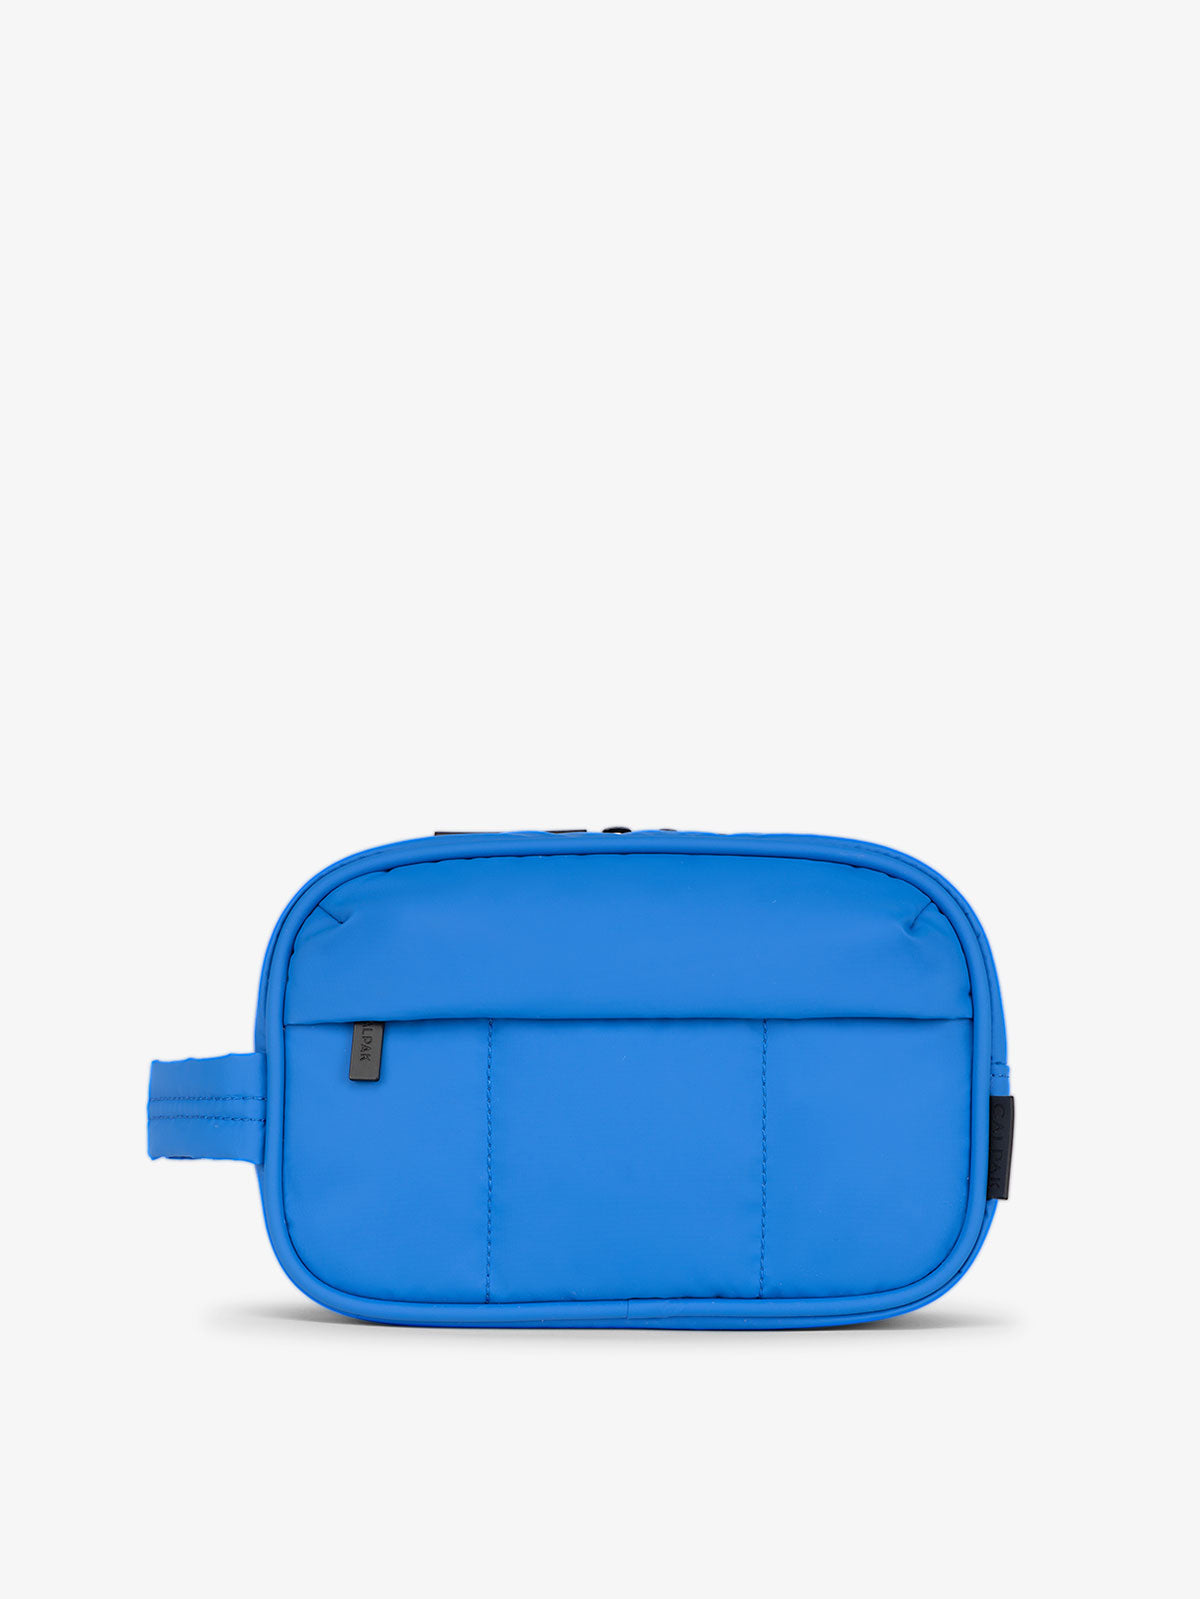 zippered blue toiletry bag